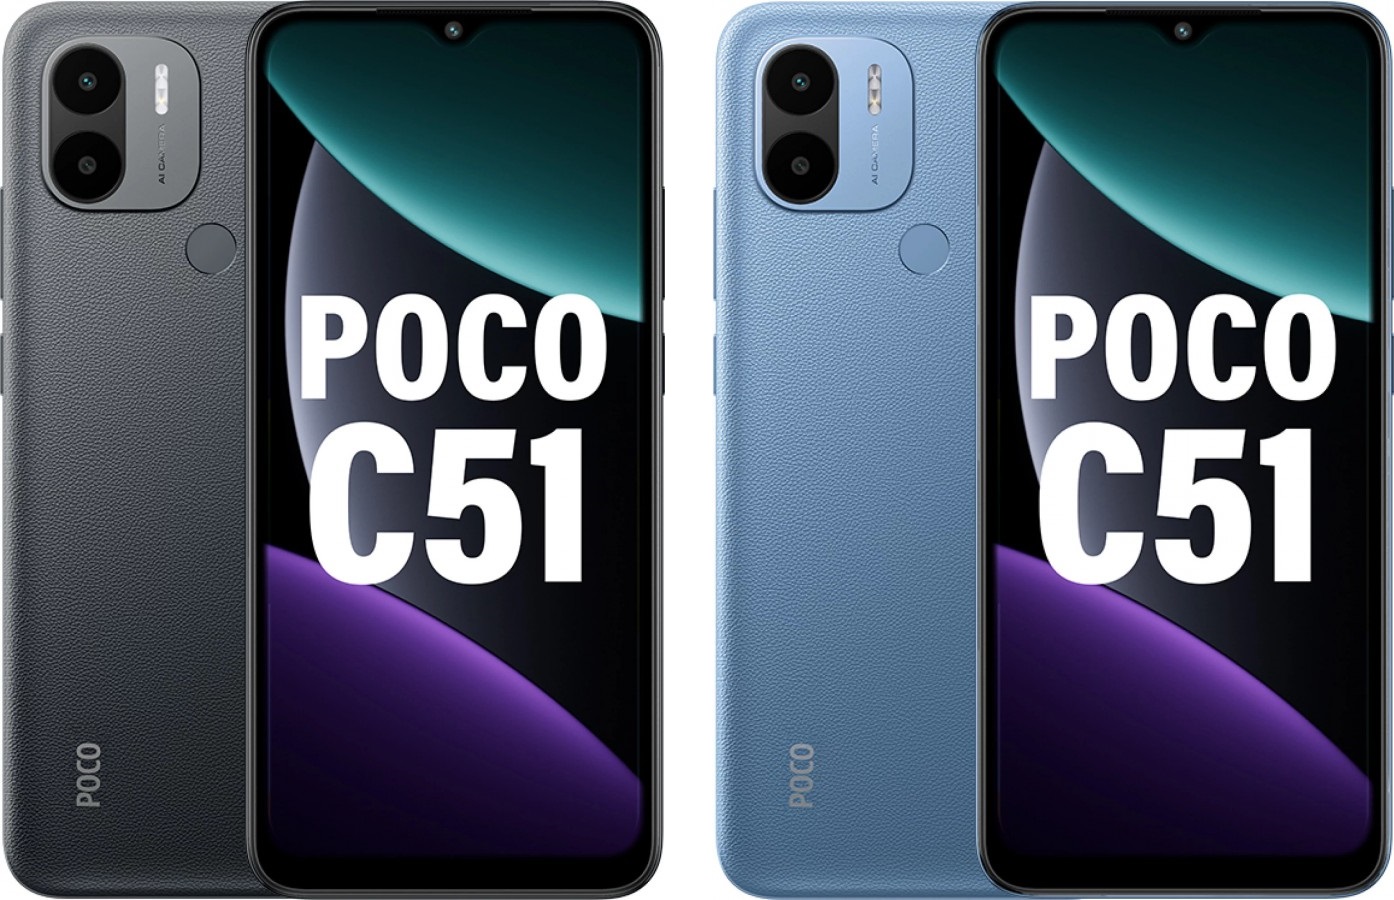 POCO C51 - Helio G36, IPS display and Android 13 Go for $105